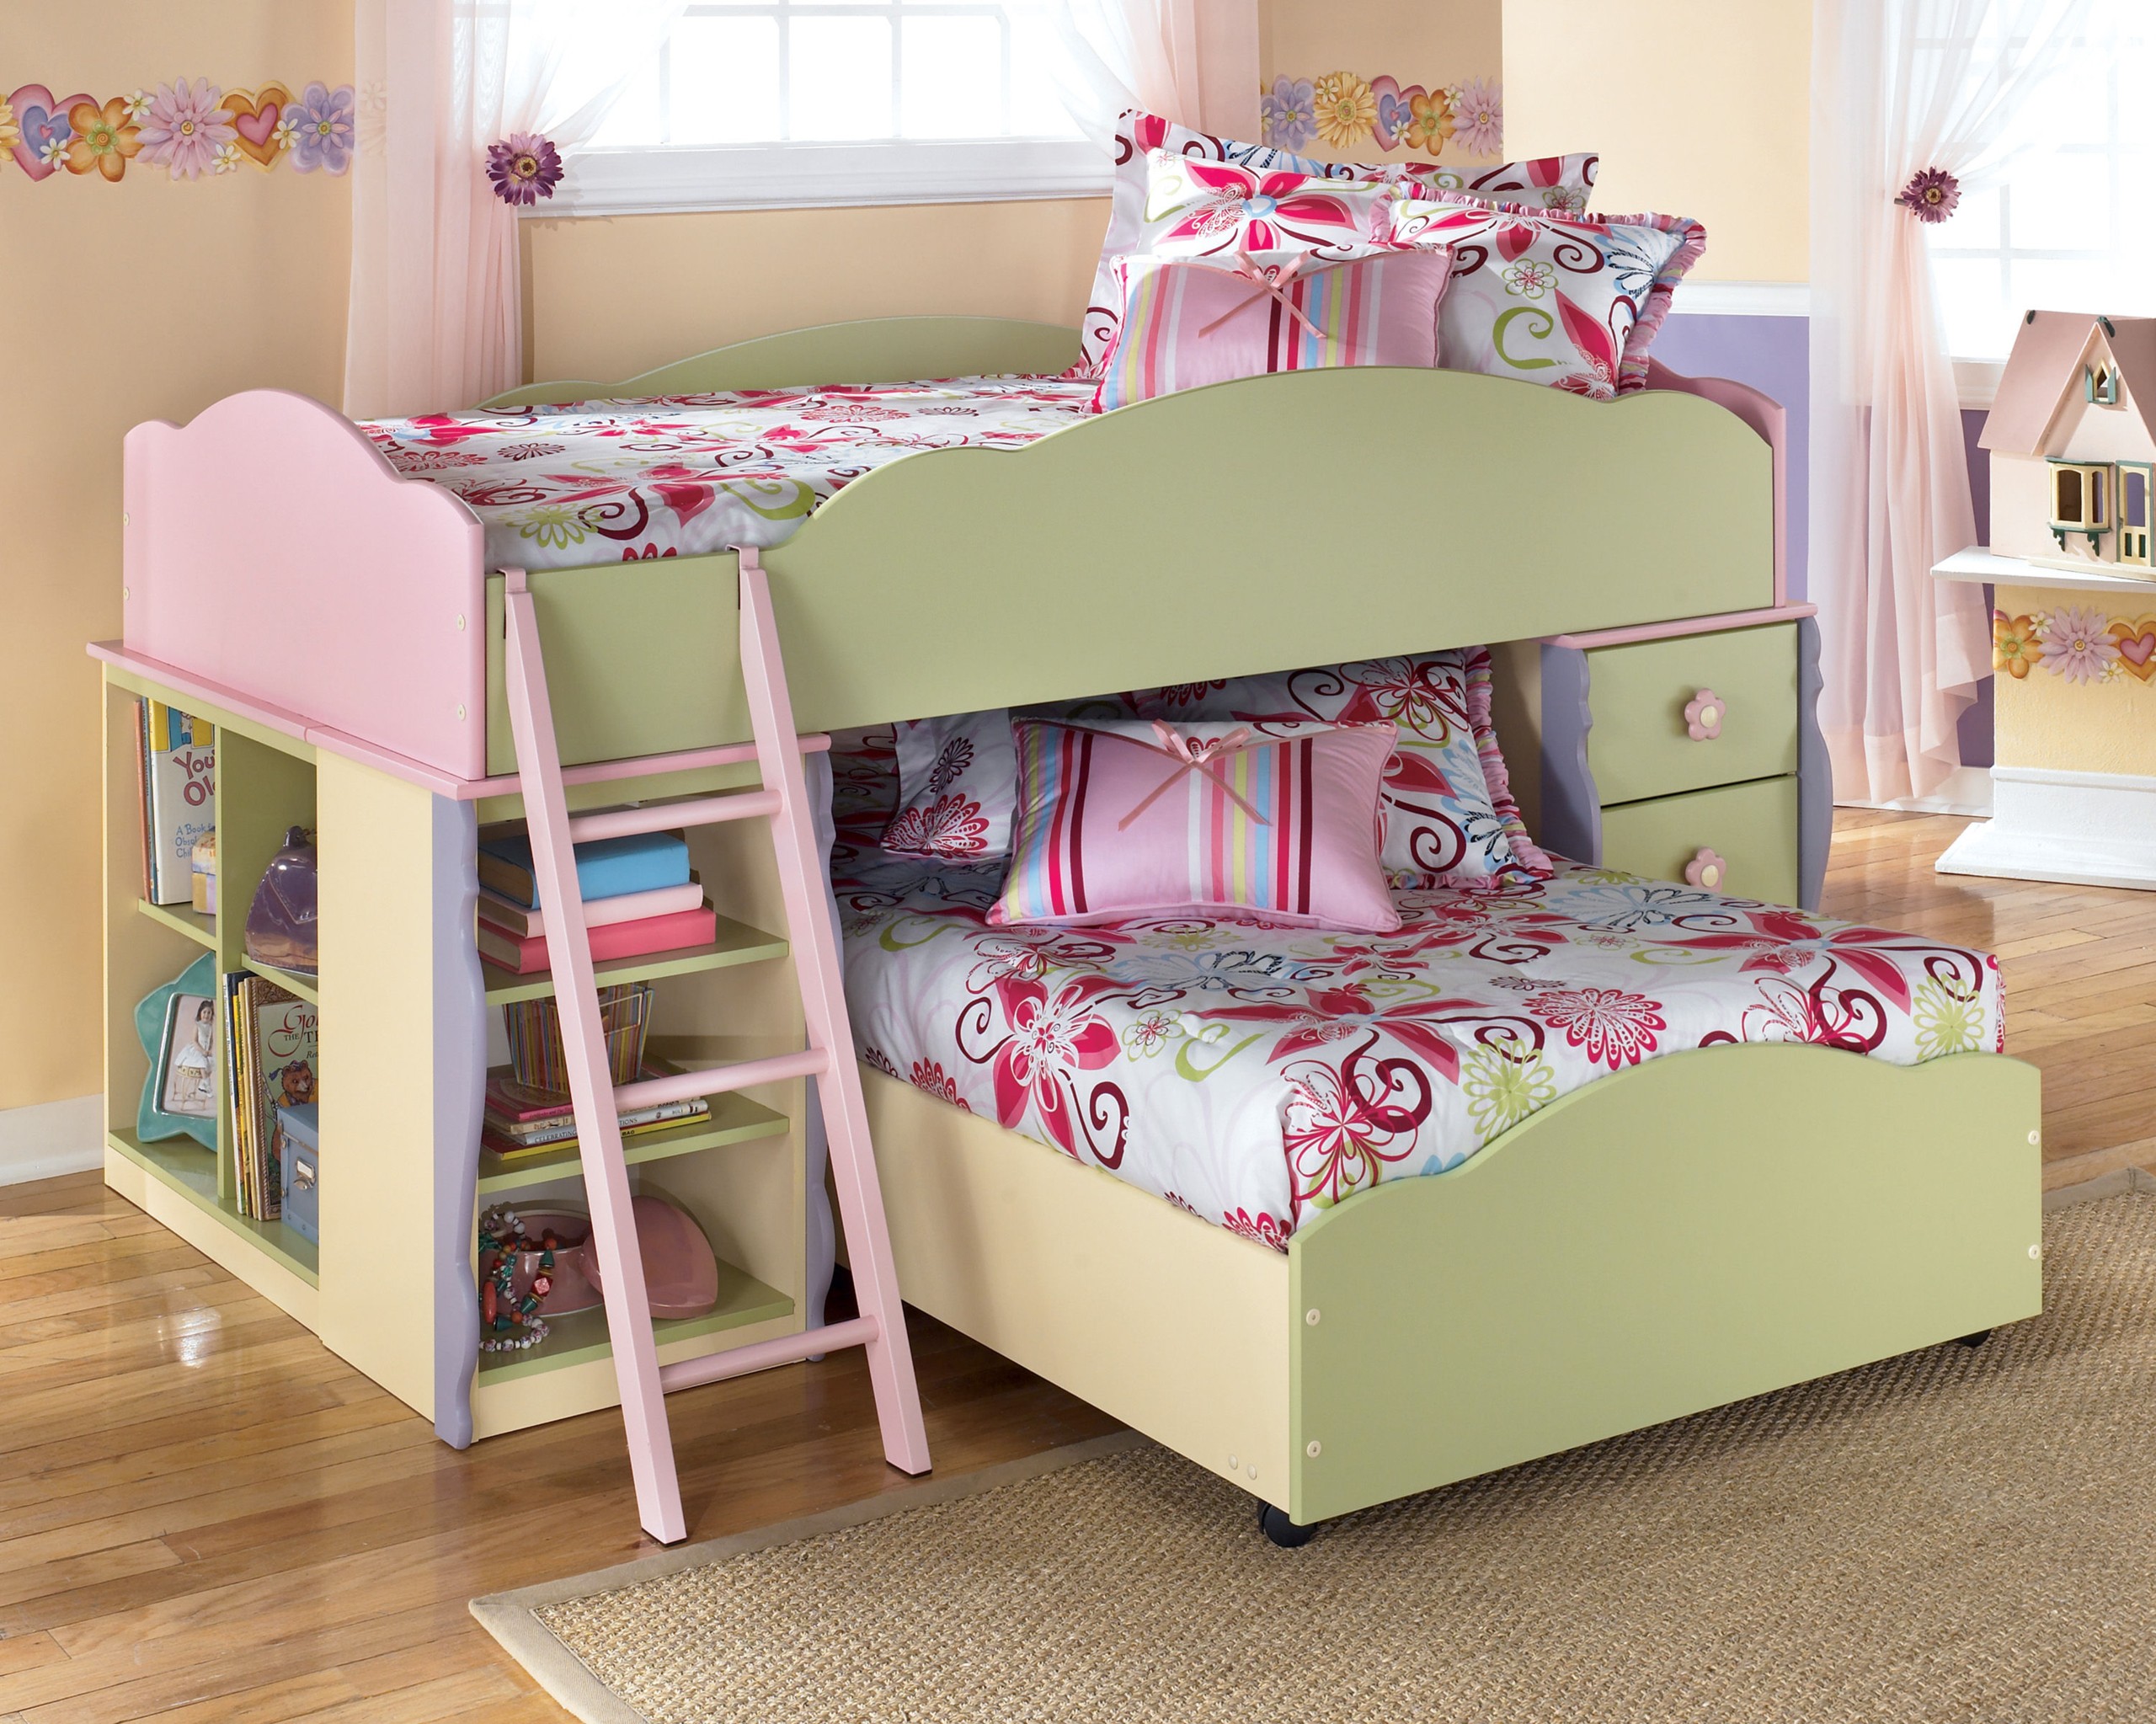 Doll house youth doll house loft bed w bottom bed